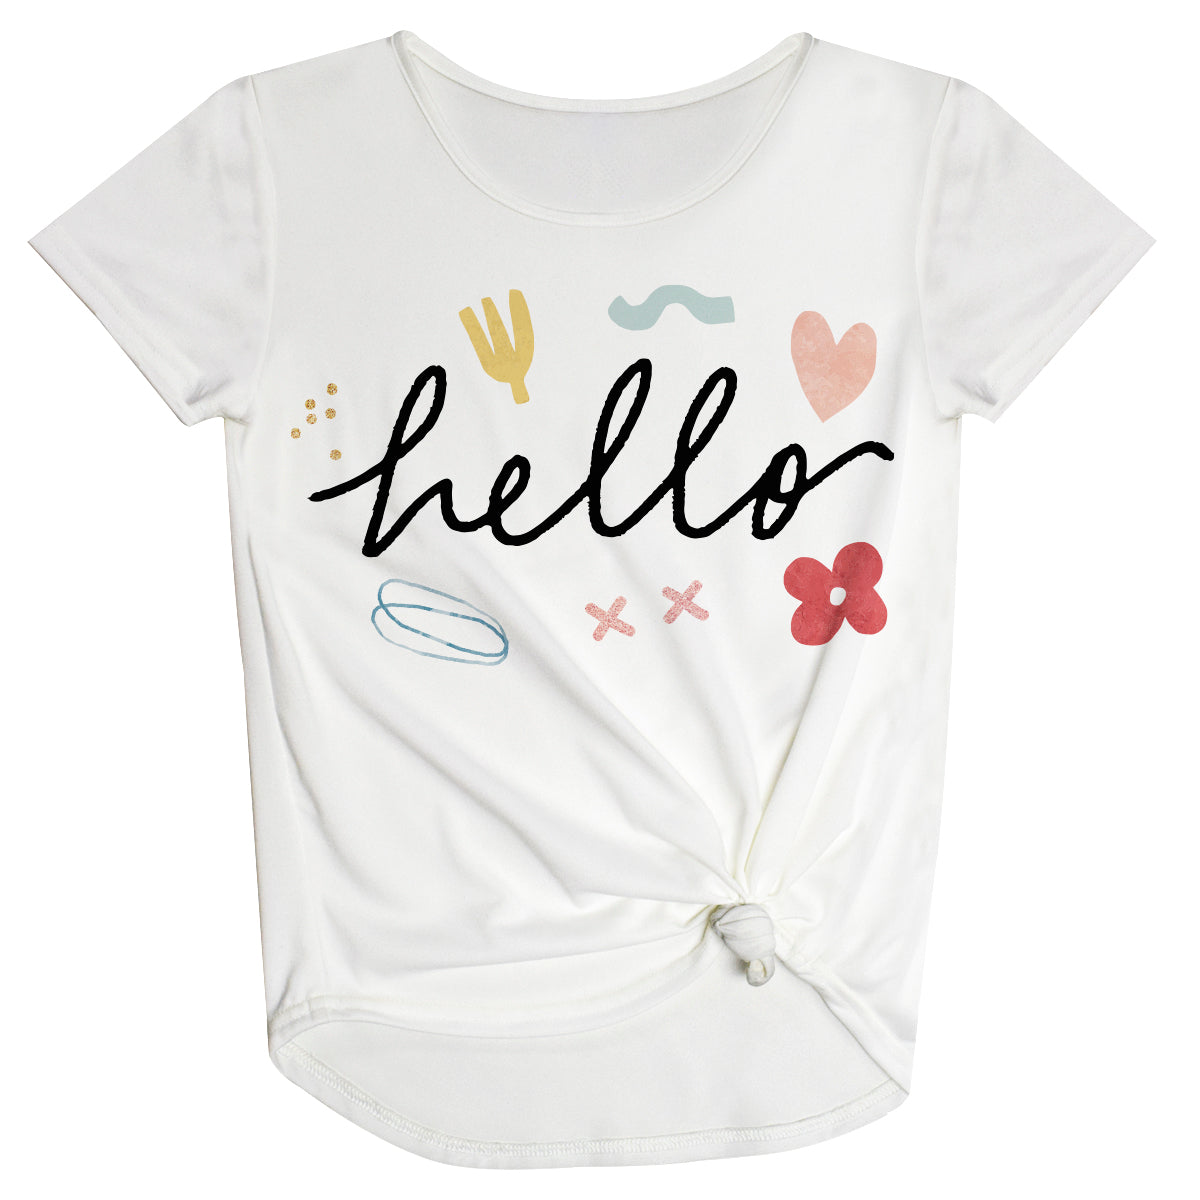 Hello White Knot Top - Wimziy&Co.